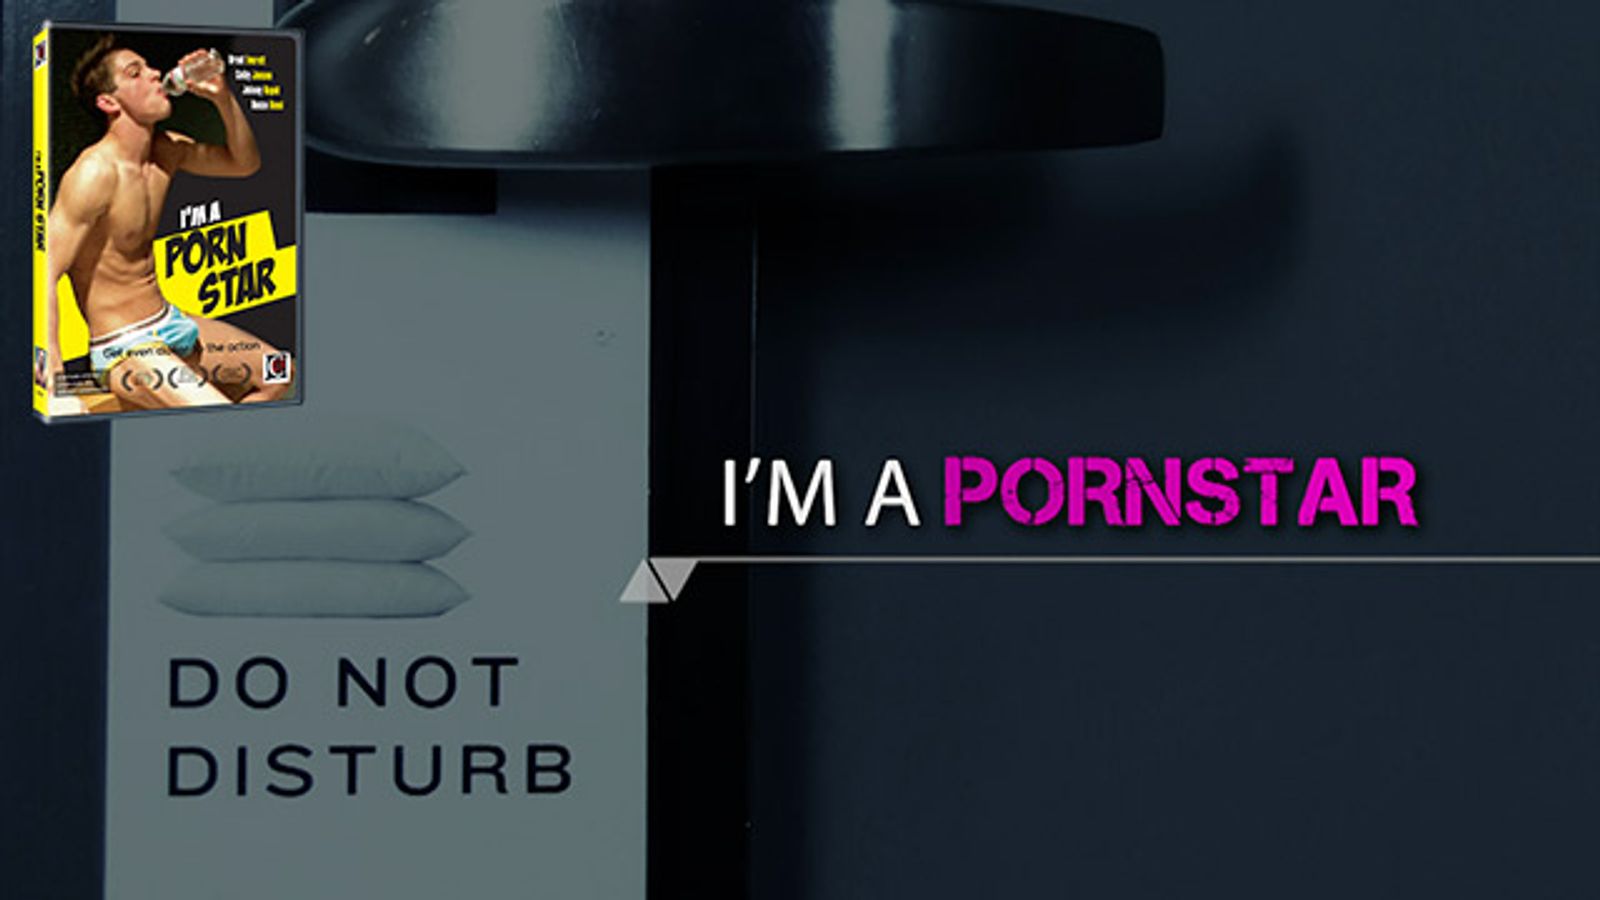 New Adult Documentary 'I'm a Porn Star' Drops on DVD Sept. 9